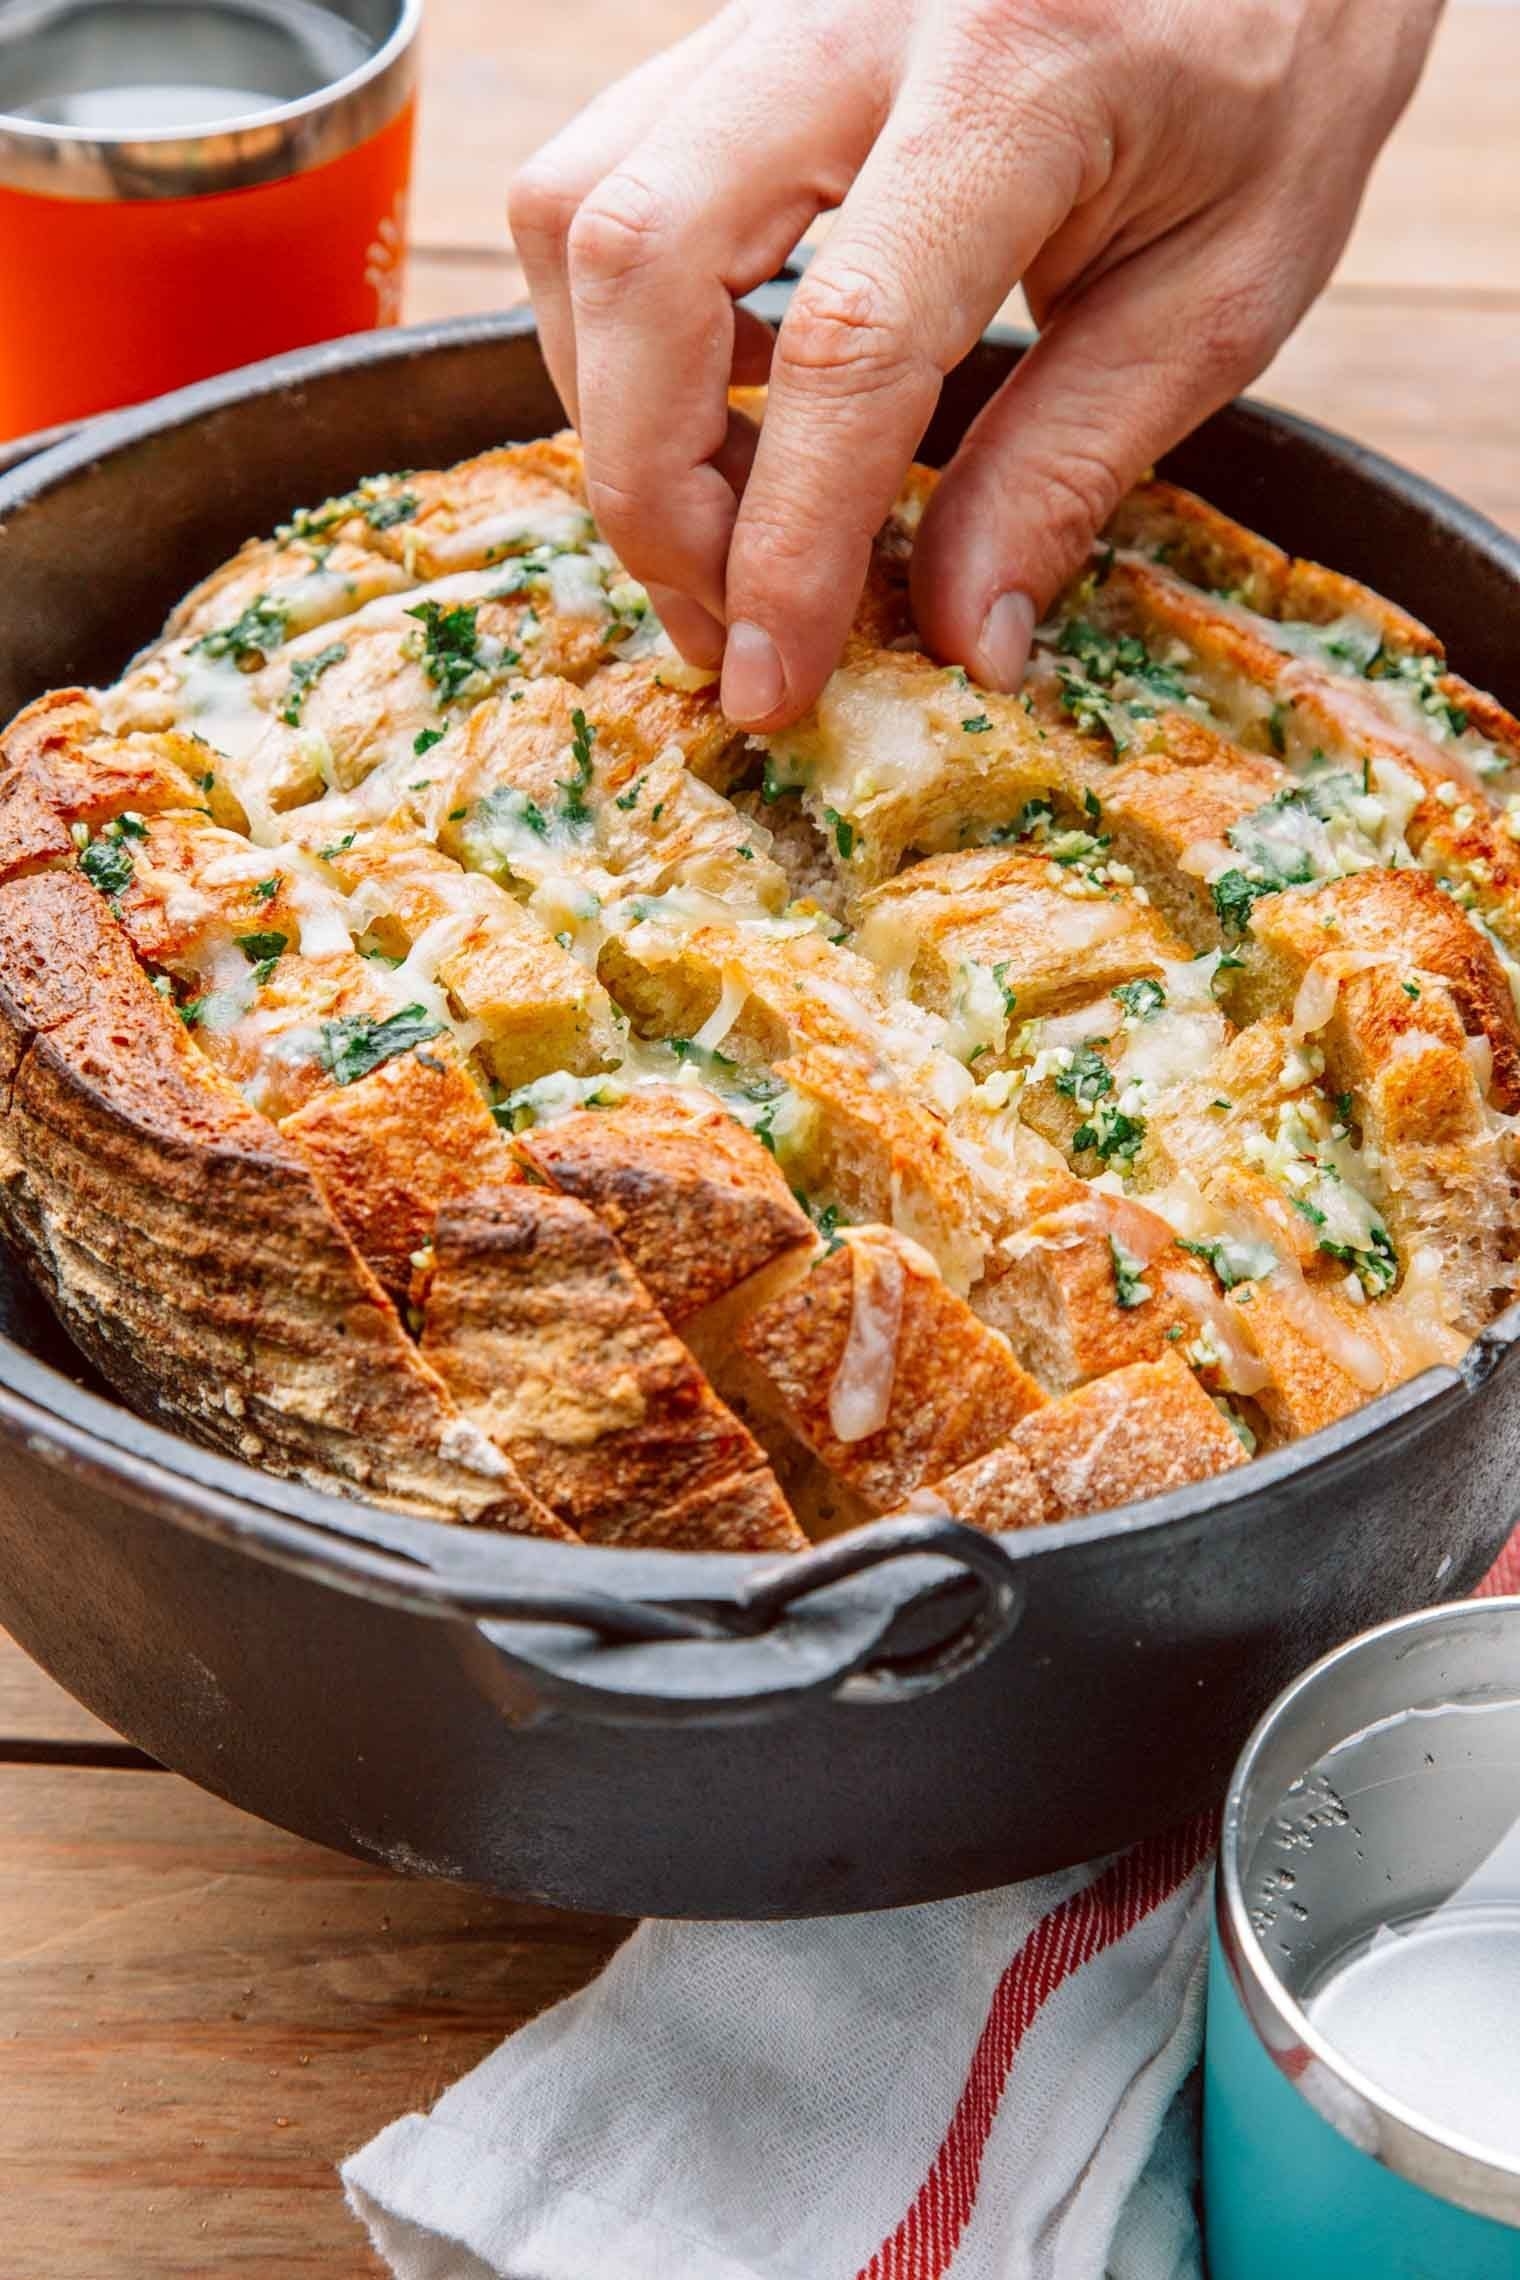 Hands reaching into a cast iron skillet full of pull-apart garlic bread.